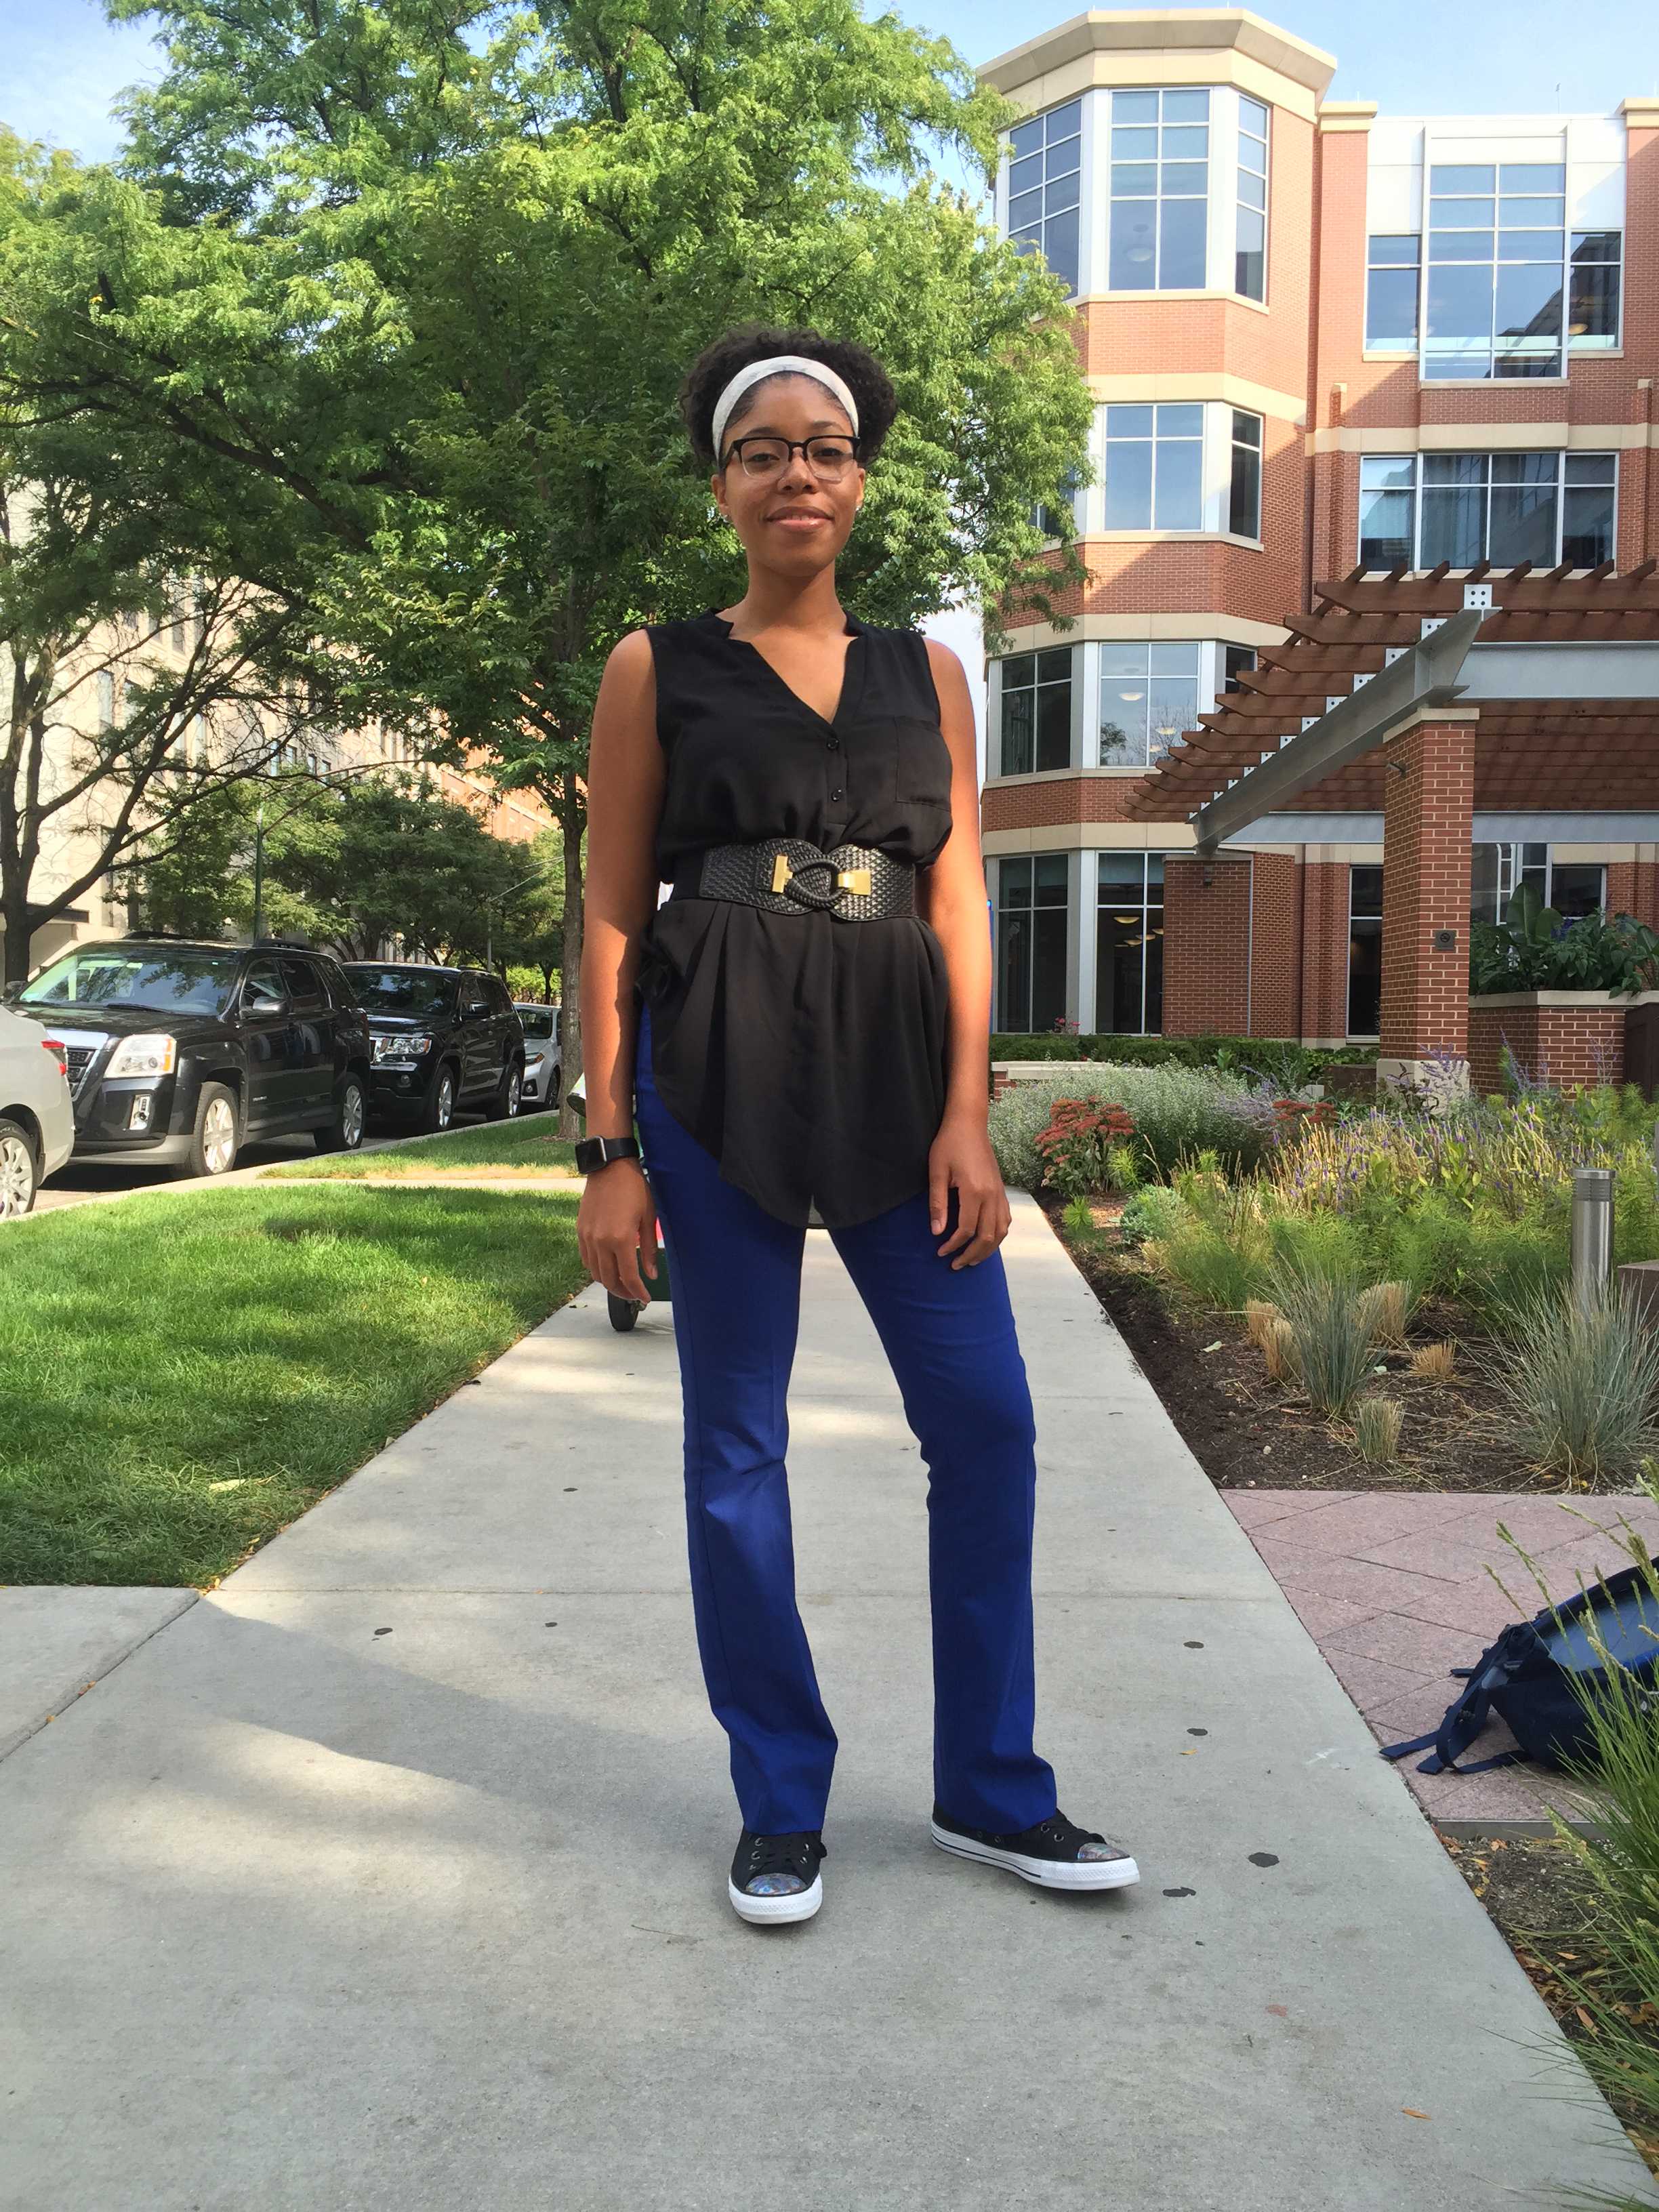 DePaul+students+choose+personal+style+over+trends